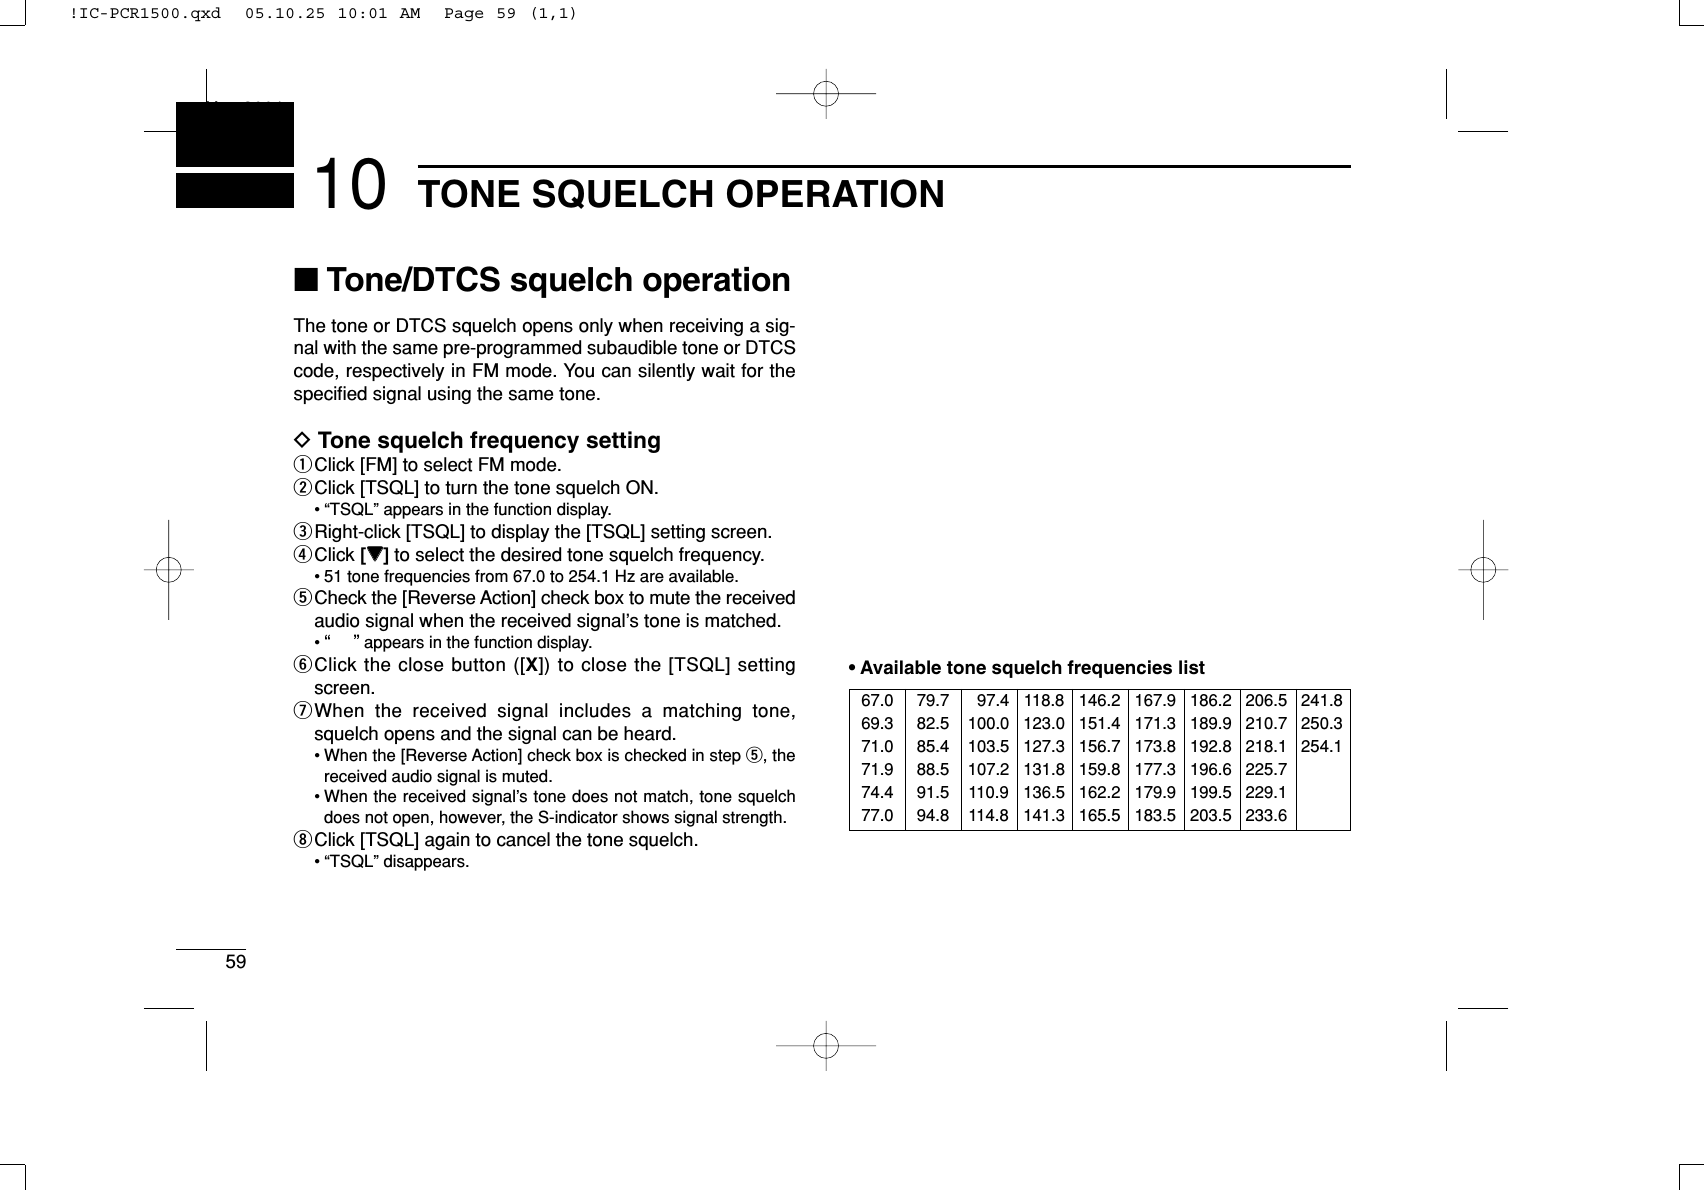 59TONE SQUELCH OPERATIONNew200110■Tone/DTCS squelch operationThe tone or DTCS squelch opens only when receiving a sig-nal with the same pre-programmed subaudible tone or DTCScode, respectively in FM mode. You can silently wait for thespeciﬁed signal using the same tone.DTone squelch frequency settingqClick [FM] to select FM mode.wClick [TSQL] to turn the tone squelch ON.• “TSQL” appears in the function display.eRight-click [TSQL] to display the [TSQL] setting screen.rClick [ZZ]to select the desired tone squelch frequency.• 51 tone frequencies from 67.0 to 254.1 Hz are available.tCheck the [Reverse Action] check box to mute the receivedaudio signal when the received signal’s tone is matched.•“”appears in the function display.yClick the close button ([X]) to close the [TSQL] settingscreen.uWhen the received signal includes a matching tone,squelch opens and the signal can be heard.• When the [Reverse Action] check box is checked in step t, thereceived audio signal is muted.• When the received signal’s tone does not match, tone squelchdoes not open, however, the S-indicator shows signal strength.iClick [TSQL] again to cancel the tone squelch.• “TSQL” disappears.•Available tone squelch frequencies list67.069.371.071.974.477.079.782.585.488.591.594.8097.4100.0103.5107.2110.9114.8118.8123.0127.3131.8136.5141.3146.2151.4156.7159.8162.2165.5167.9171.3173.8177.3179.9183.5186.2189.9192.8196.6199.5203.5206.5210.7218.1225.7229.1233.6241.8250.3254.1!IC-PCR1500.qxd  05.10.25 10:01 AM  Page 59 (1,1)